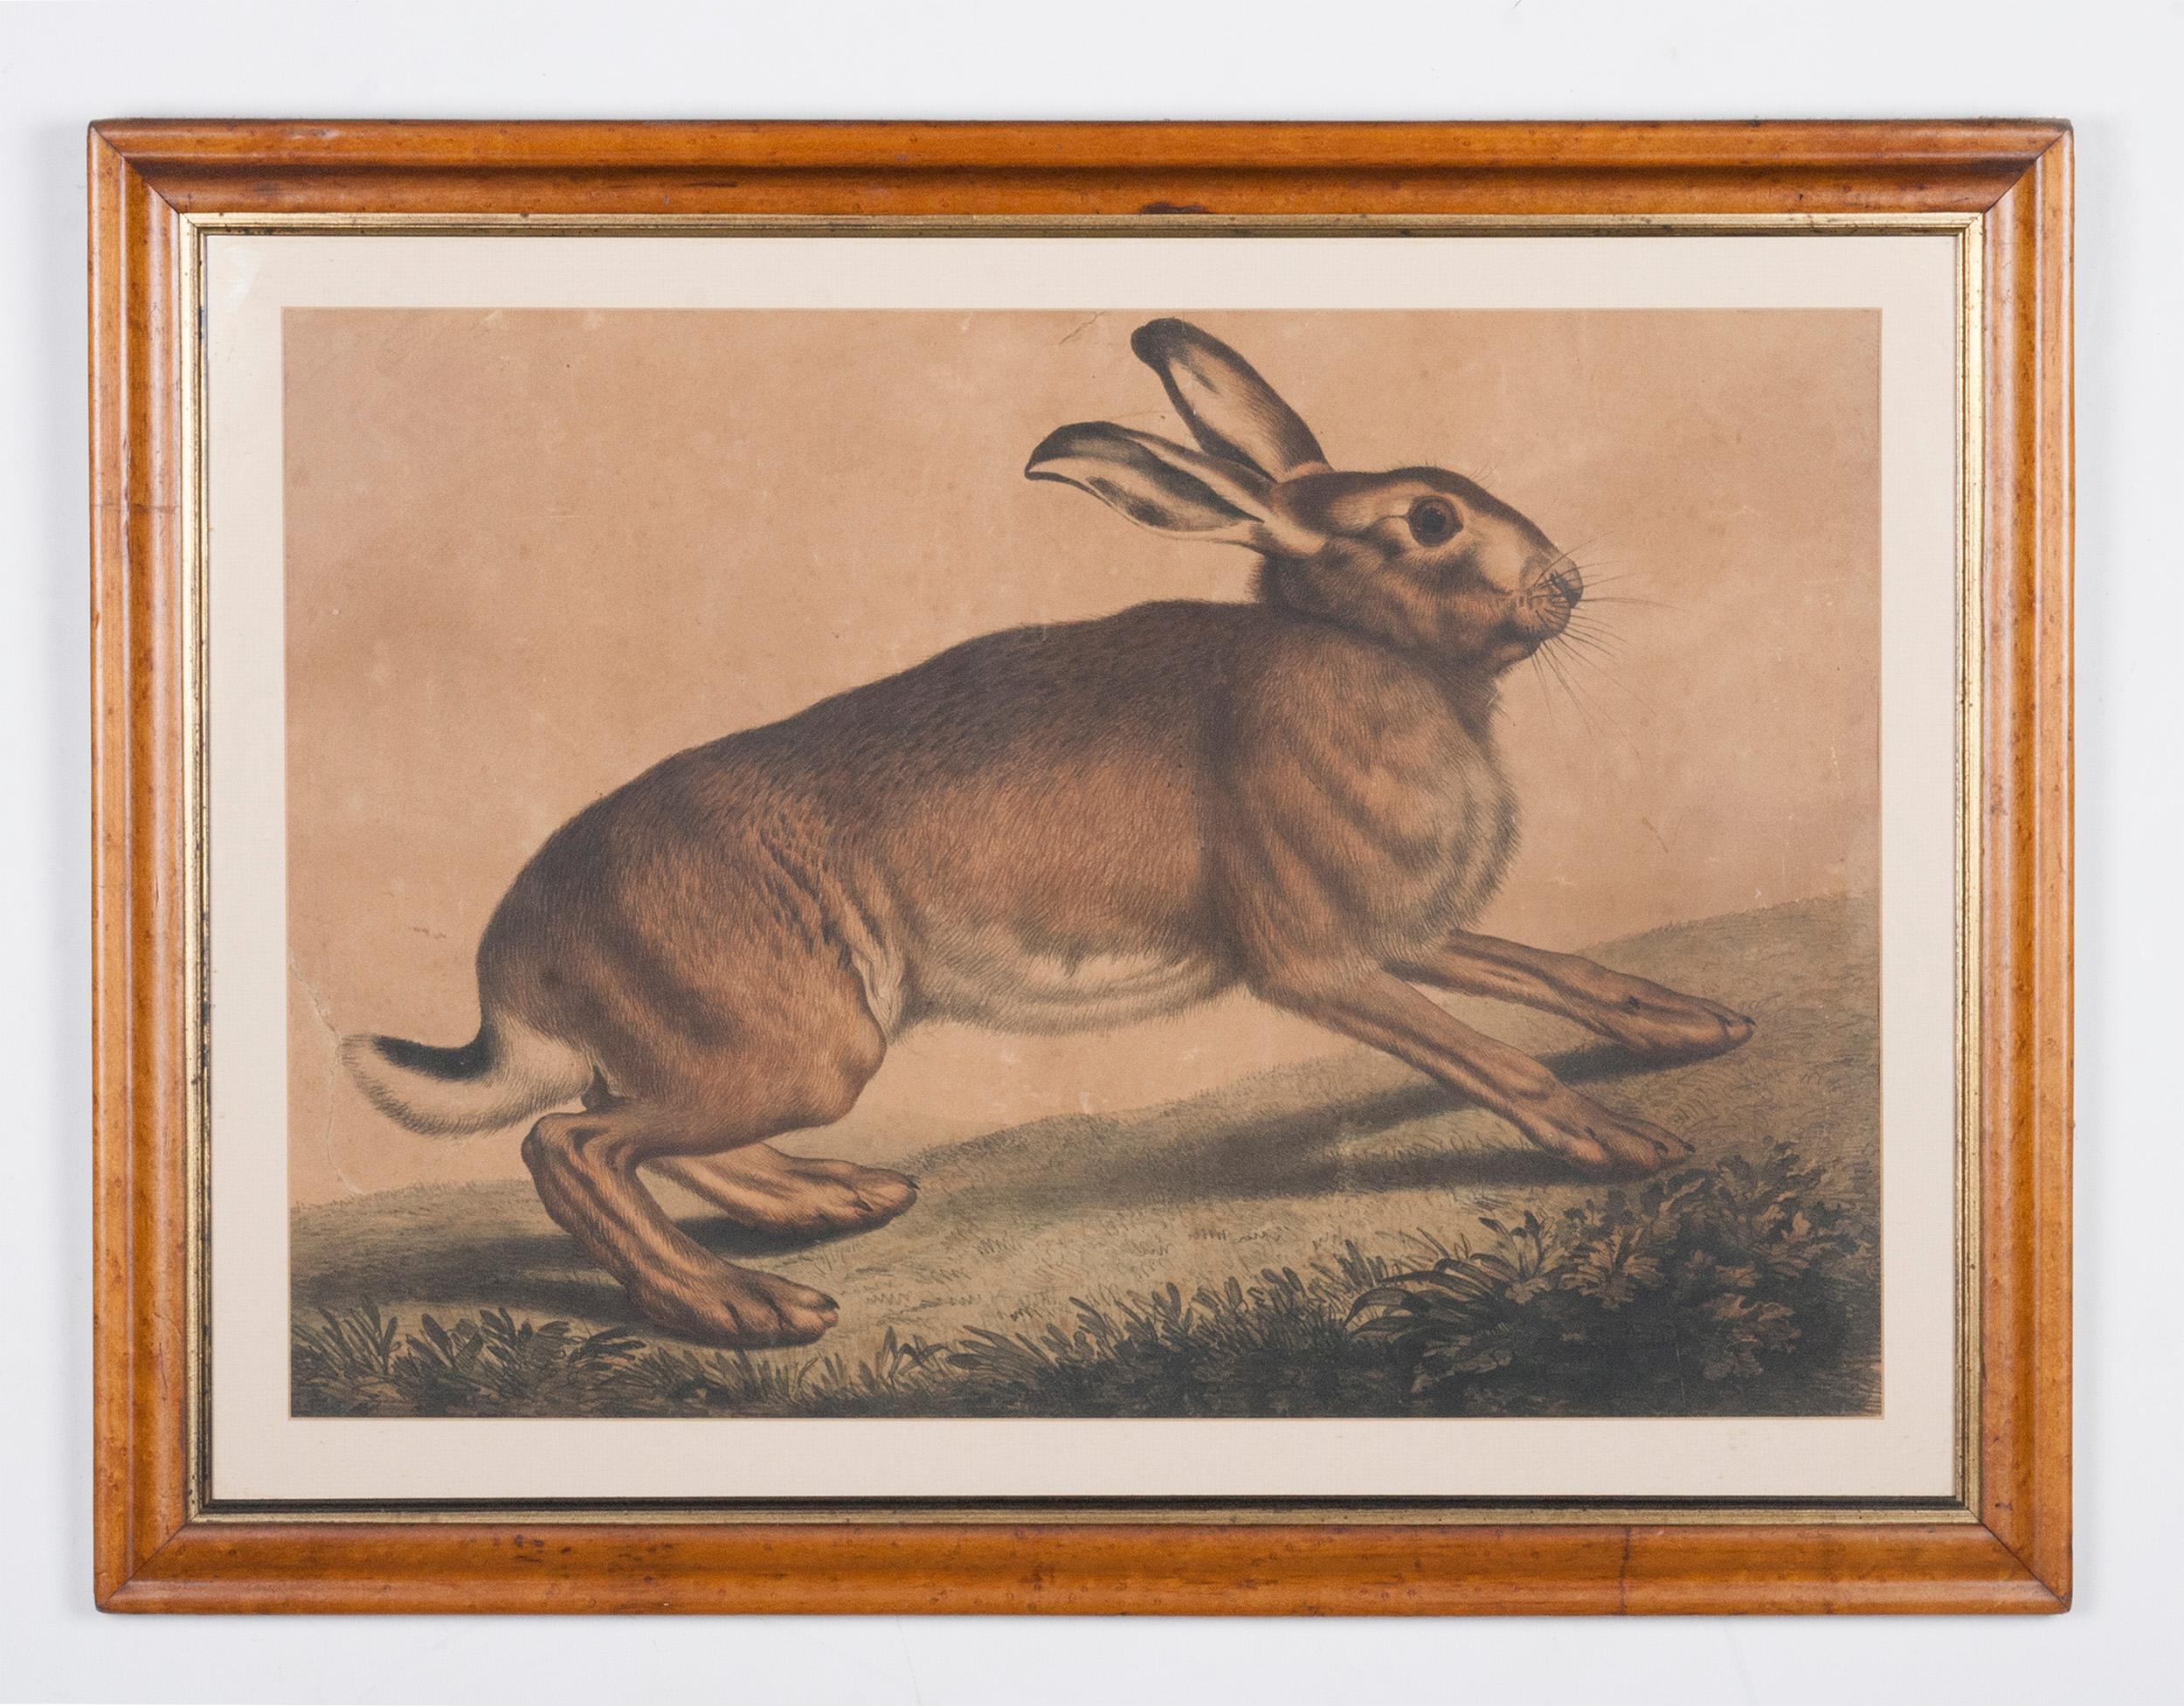 Large antique print of a hare.
The print can be dated circa 1880-1900.
The frame dates from the same time. It is a maple frame with the original old glass.